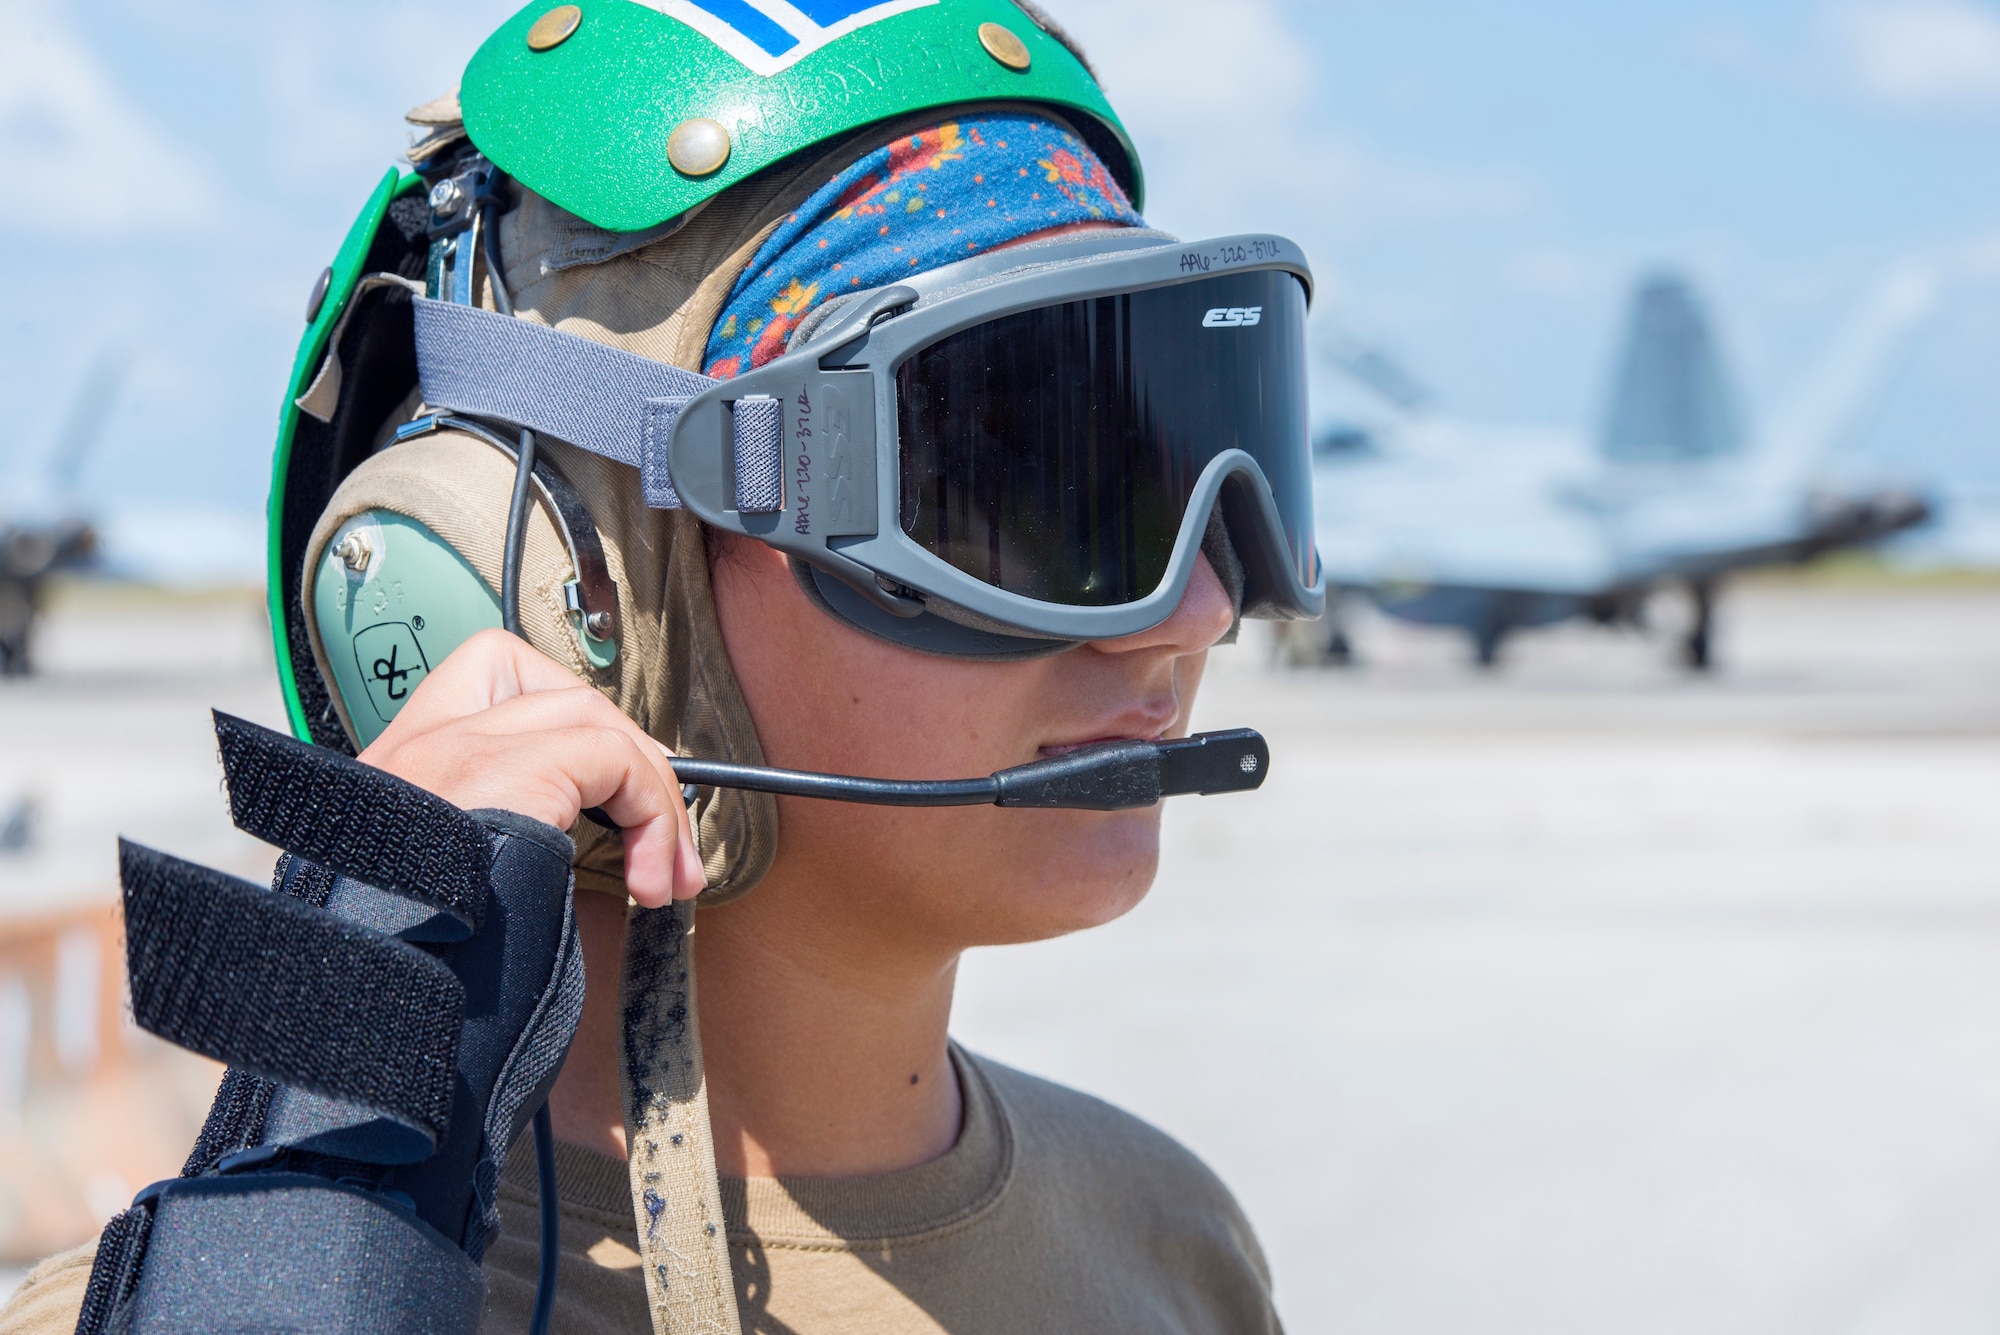 Petty Officer 3rd Class Sylvia Gonzalez, a Strike Fighter Squadron 106 aviation mechanic from Naval Air Station Oceania, Va., communicates with a fellow Sailor at MacDill Air Force Base, Fla., Oct. 1, 2019.